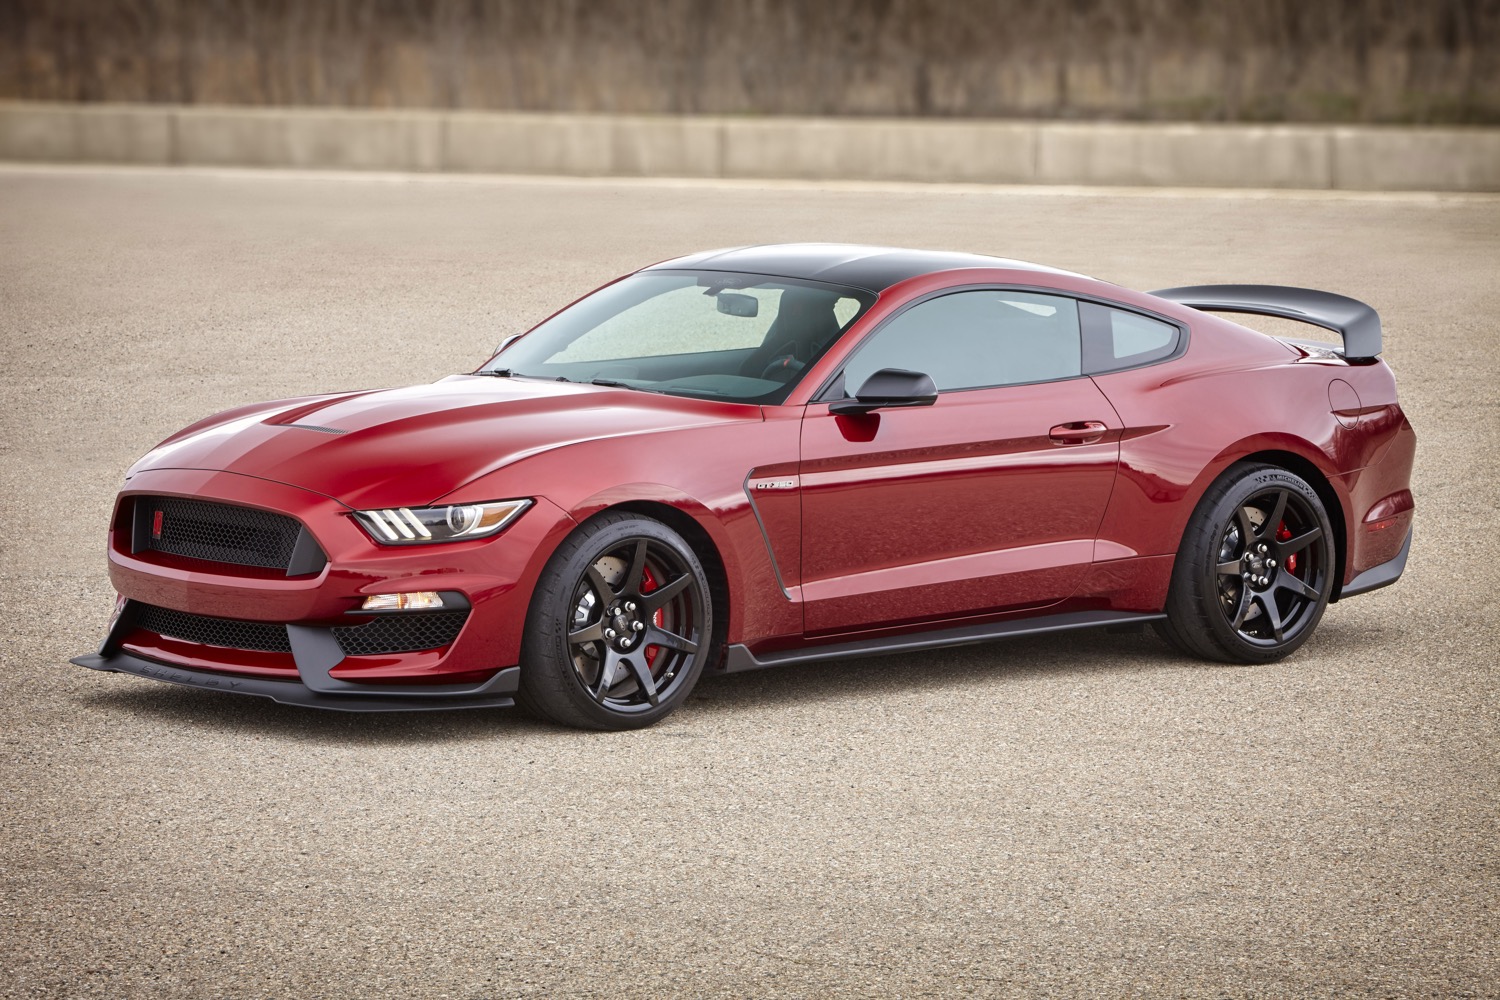 2017 Ford Shelby Gt350 Mustang Photos Details Specs Digital Trends 2326